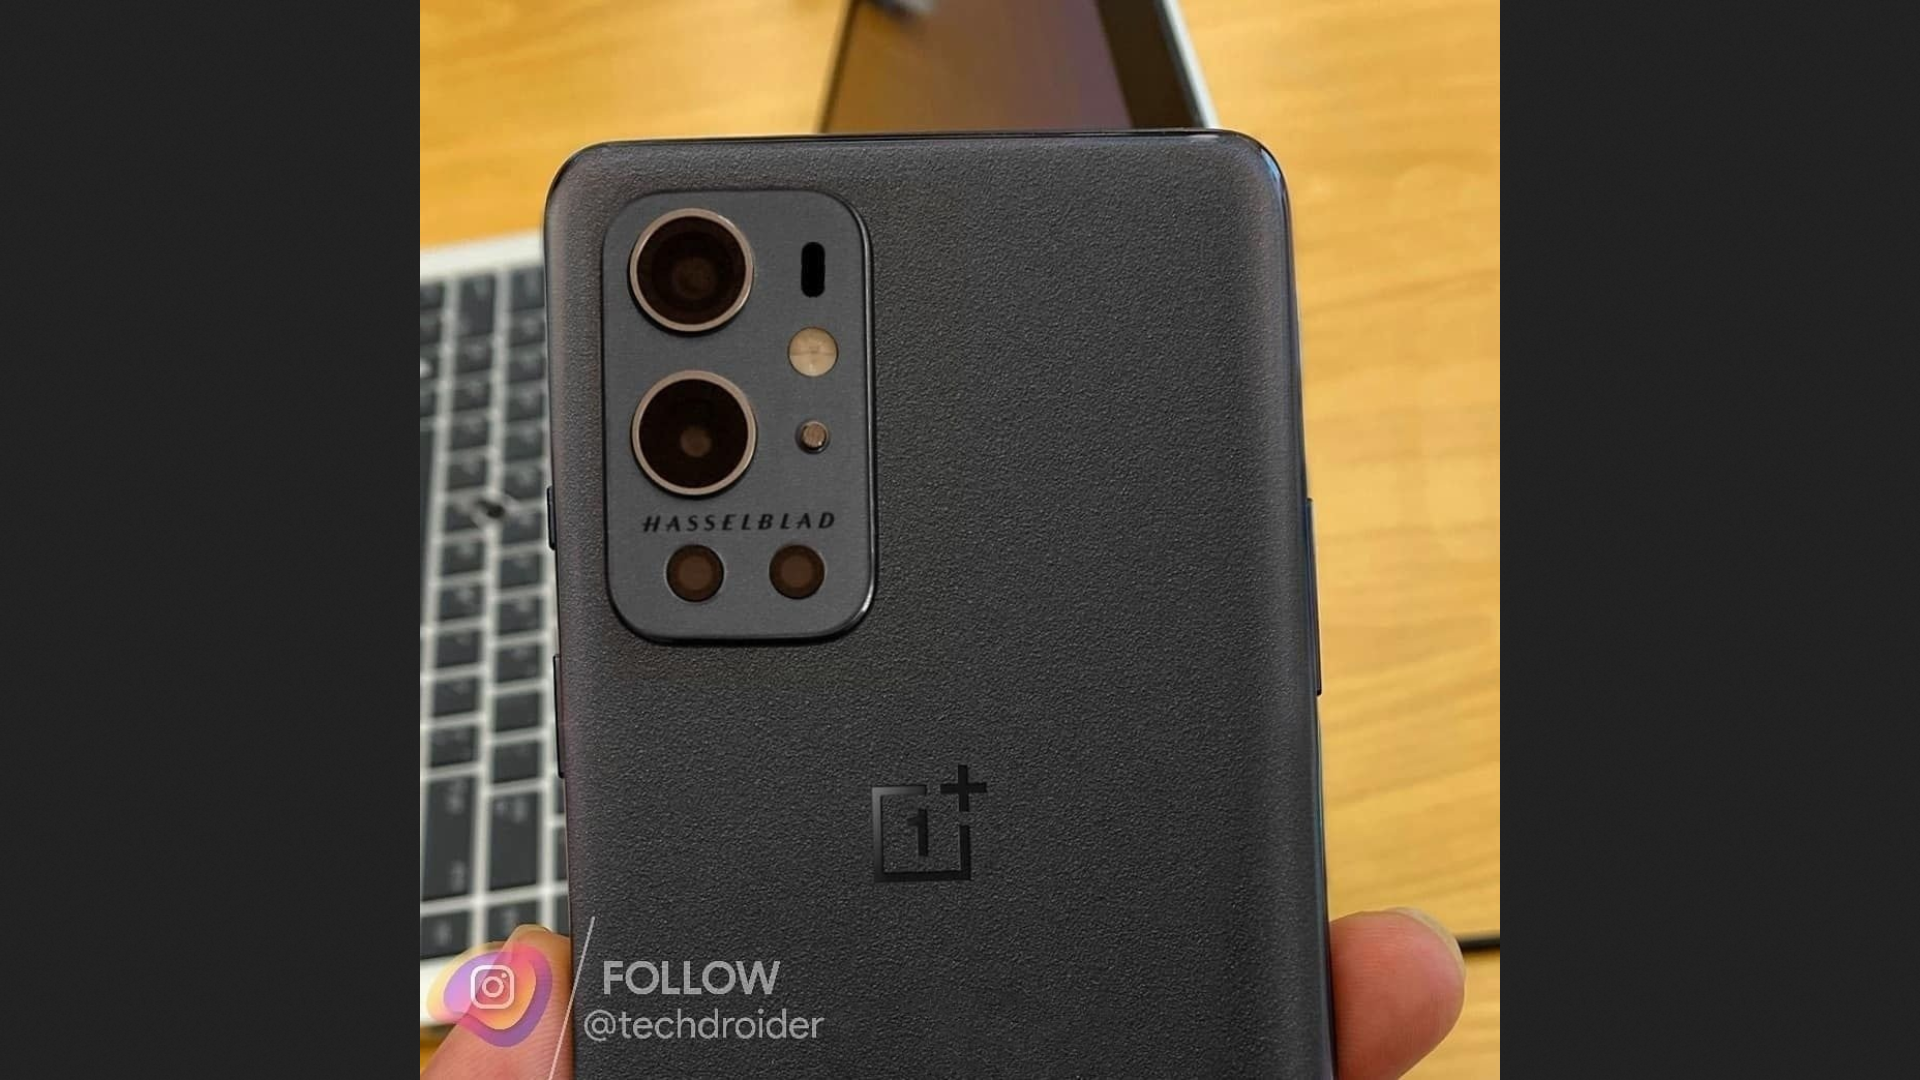 OnePlus Re-Introduces New Camera Technology While Leaking Out Stellar Black Version Of 9 Pro